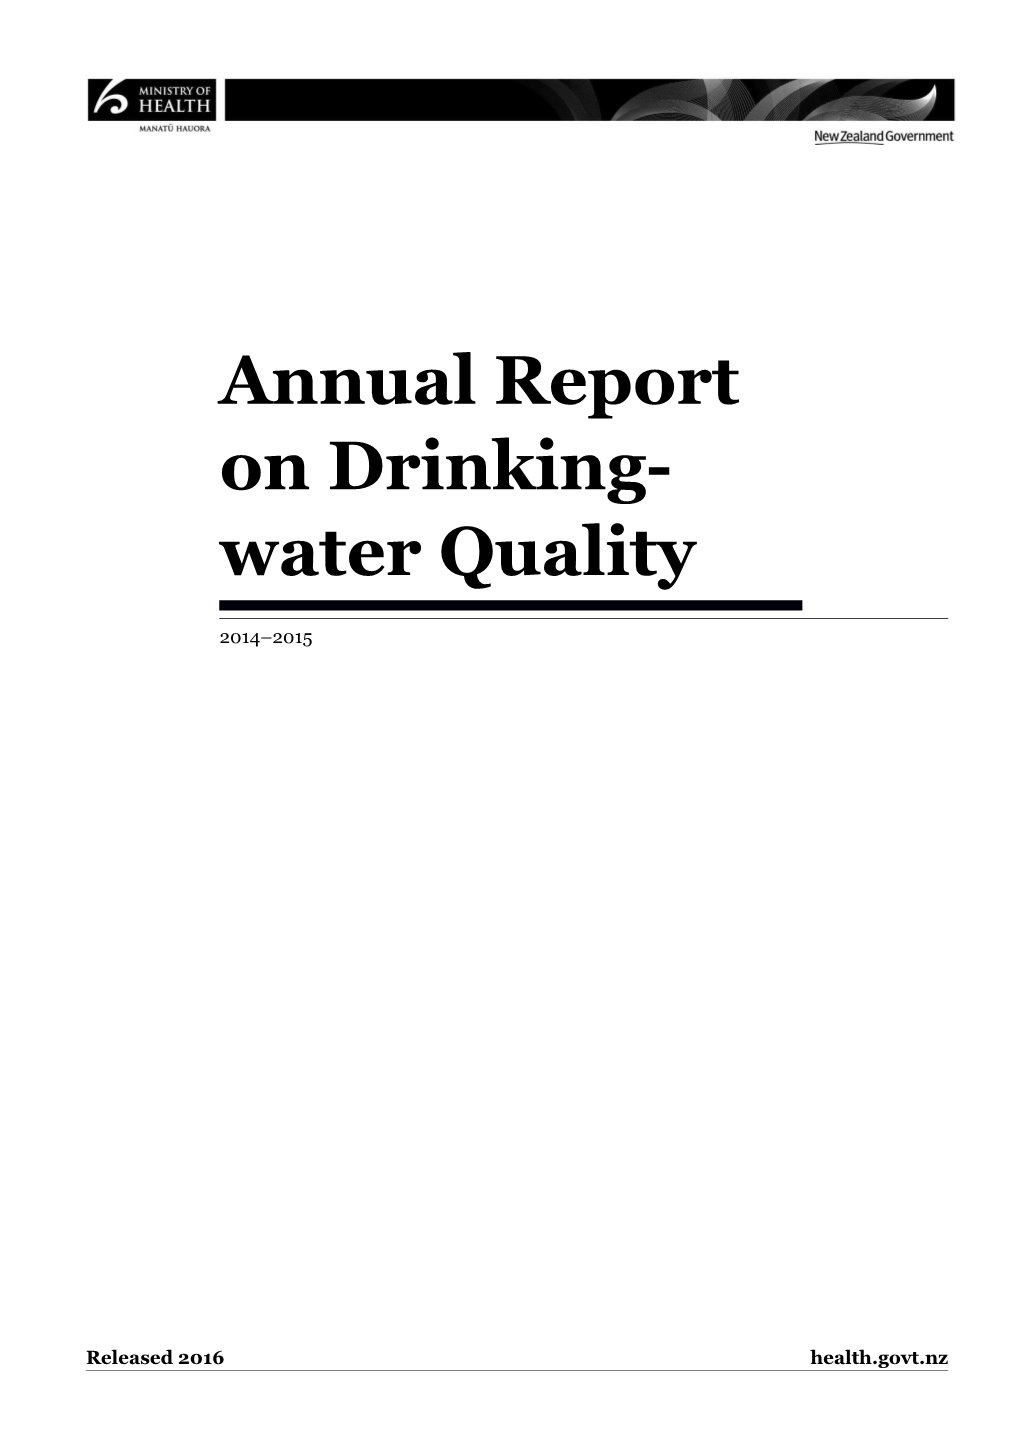 Annual Report on Drinking-Water Quality 2014 2015